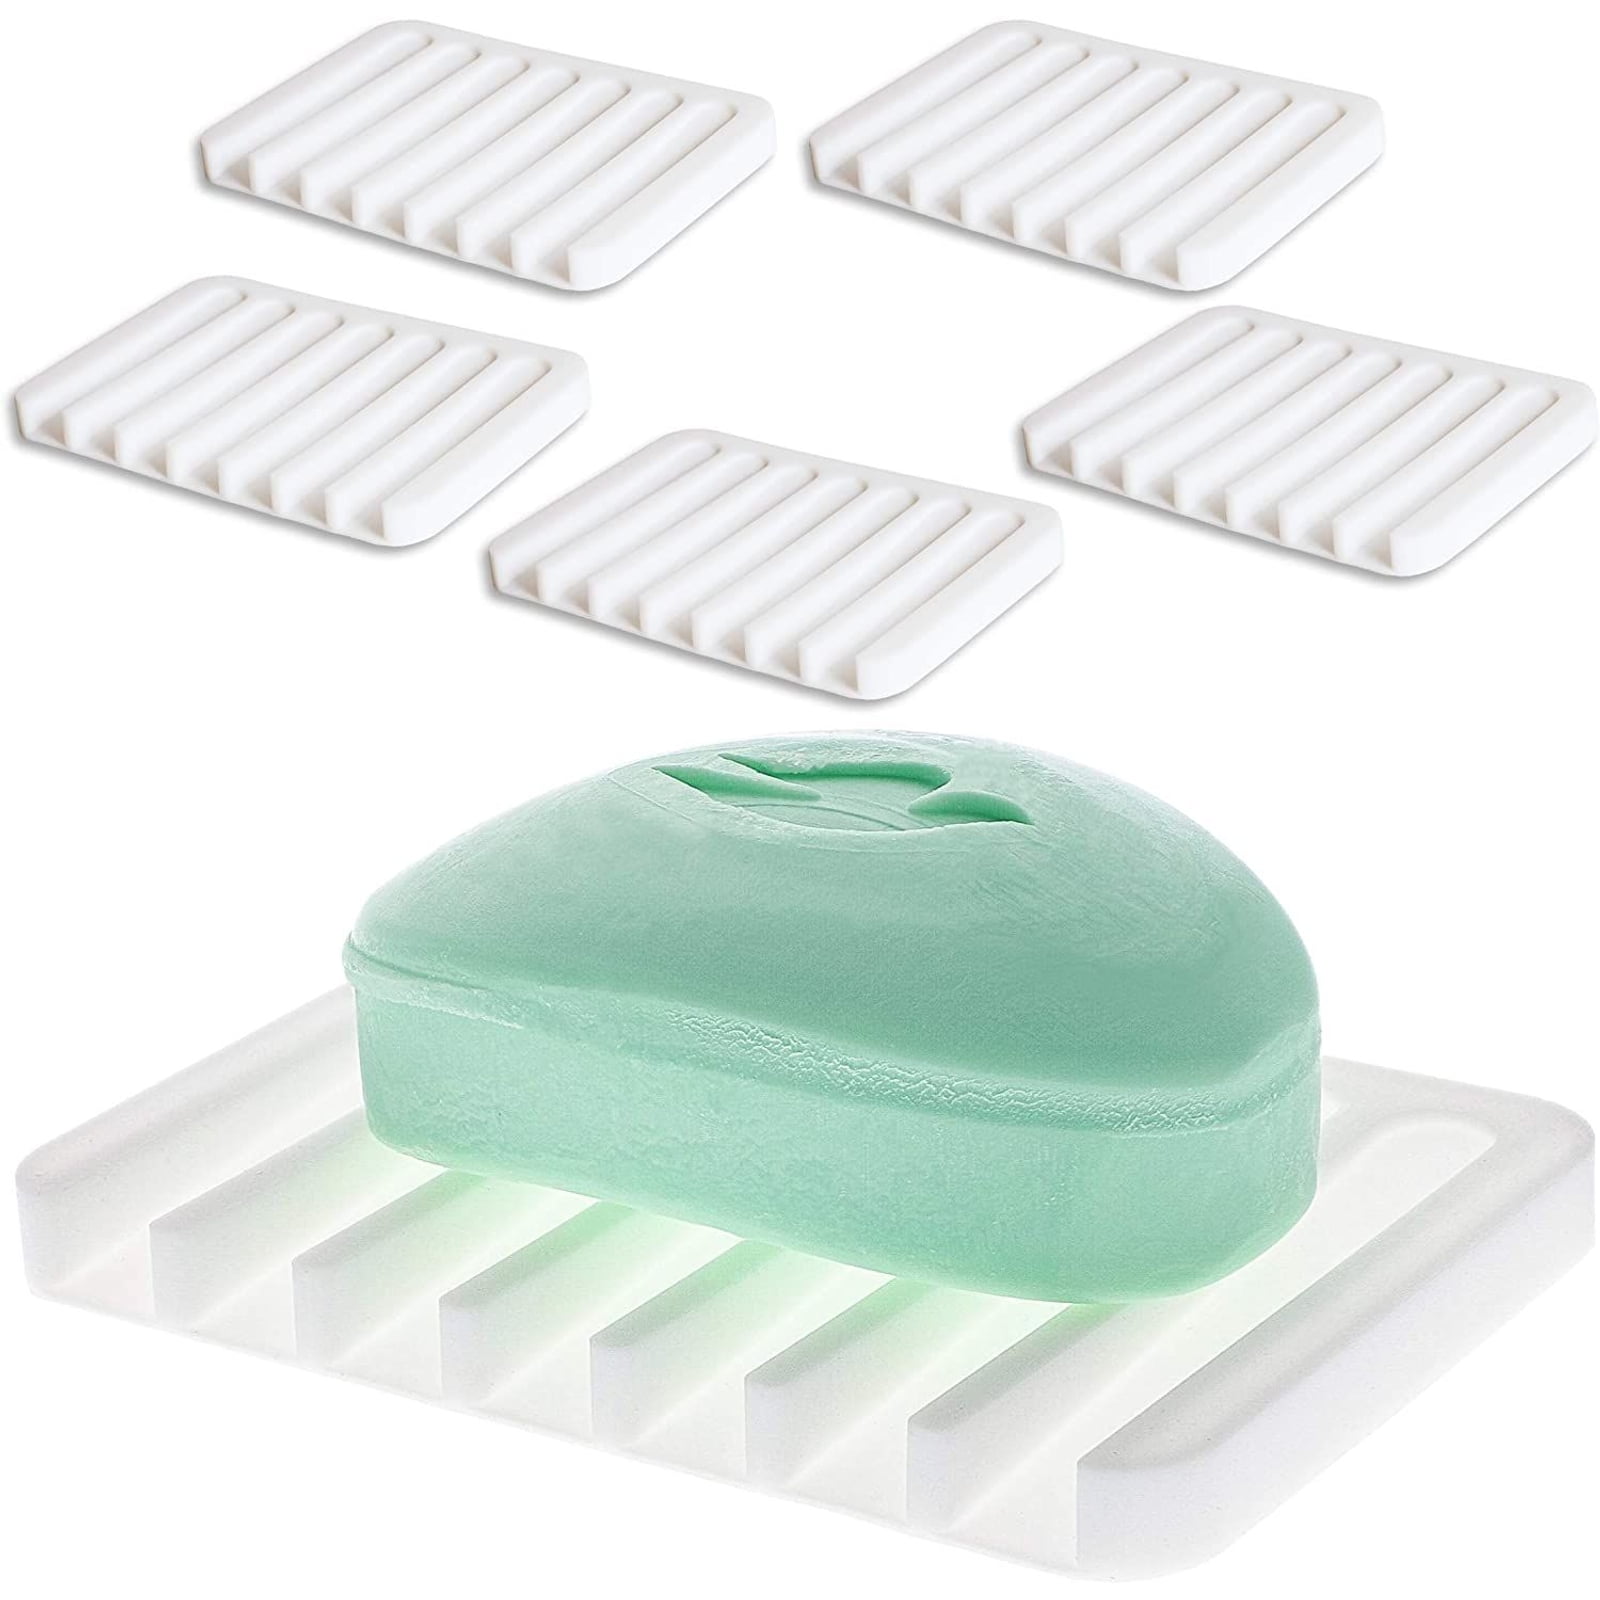 Self-draining Waterfall LONAGE Soap Dish 2 Pack-Grey Non-Slip Design Soap Tray Saver Drainer Easy Cleaning Premium Silicone Soap Holder for Shower Bathroom Kitchen Sink